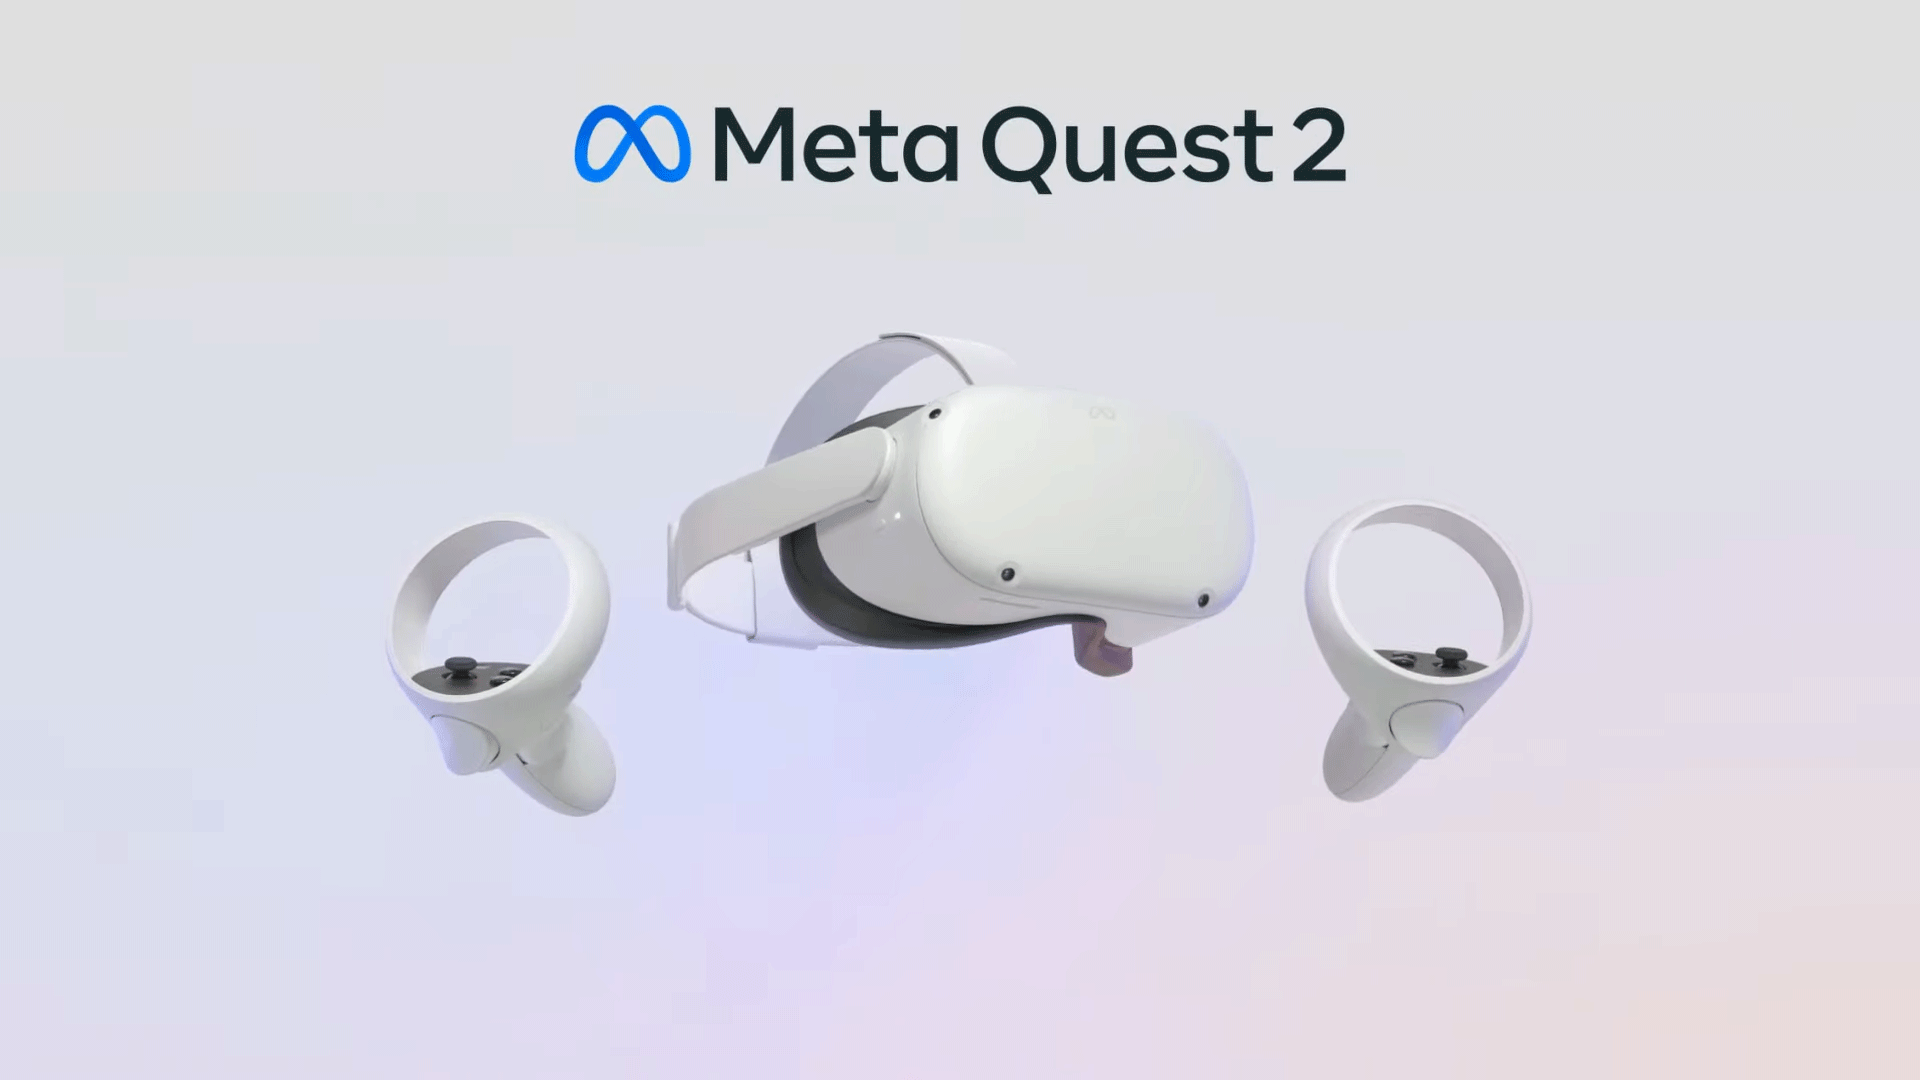 Quest 2 Stock Appears to be Draining as Holiday Sale Drives Purchases